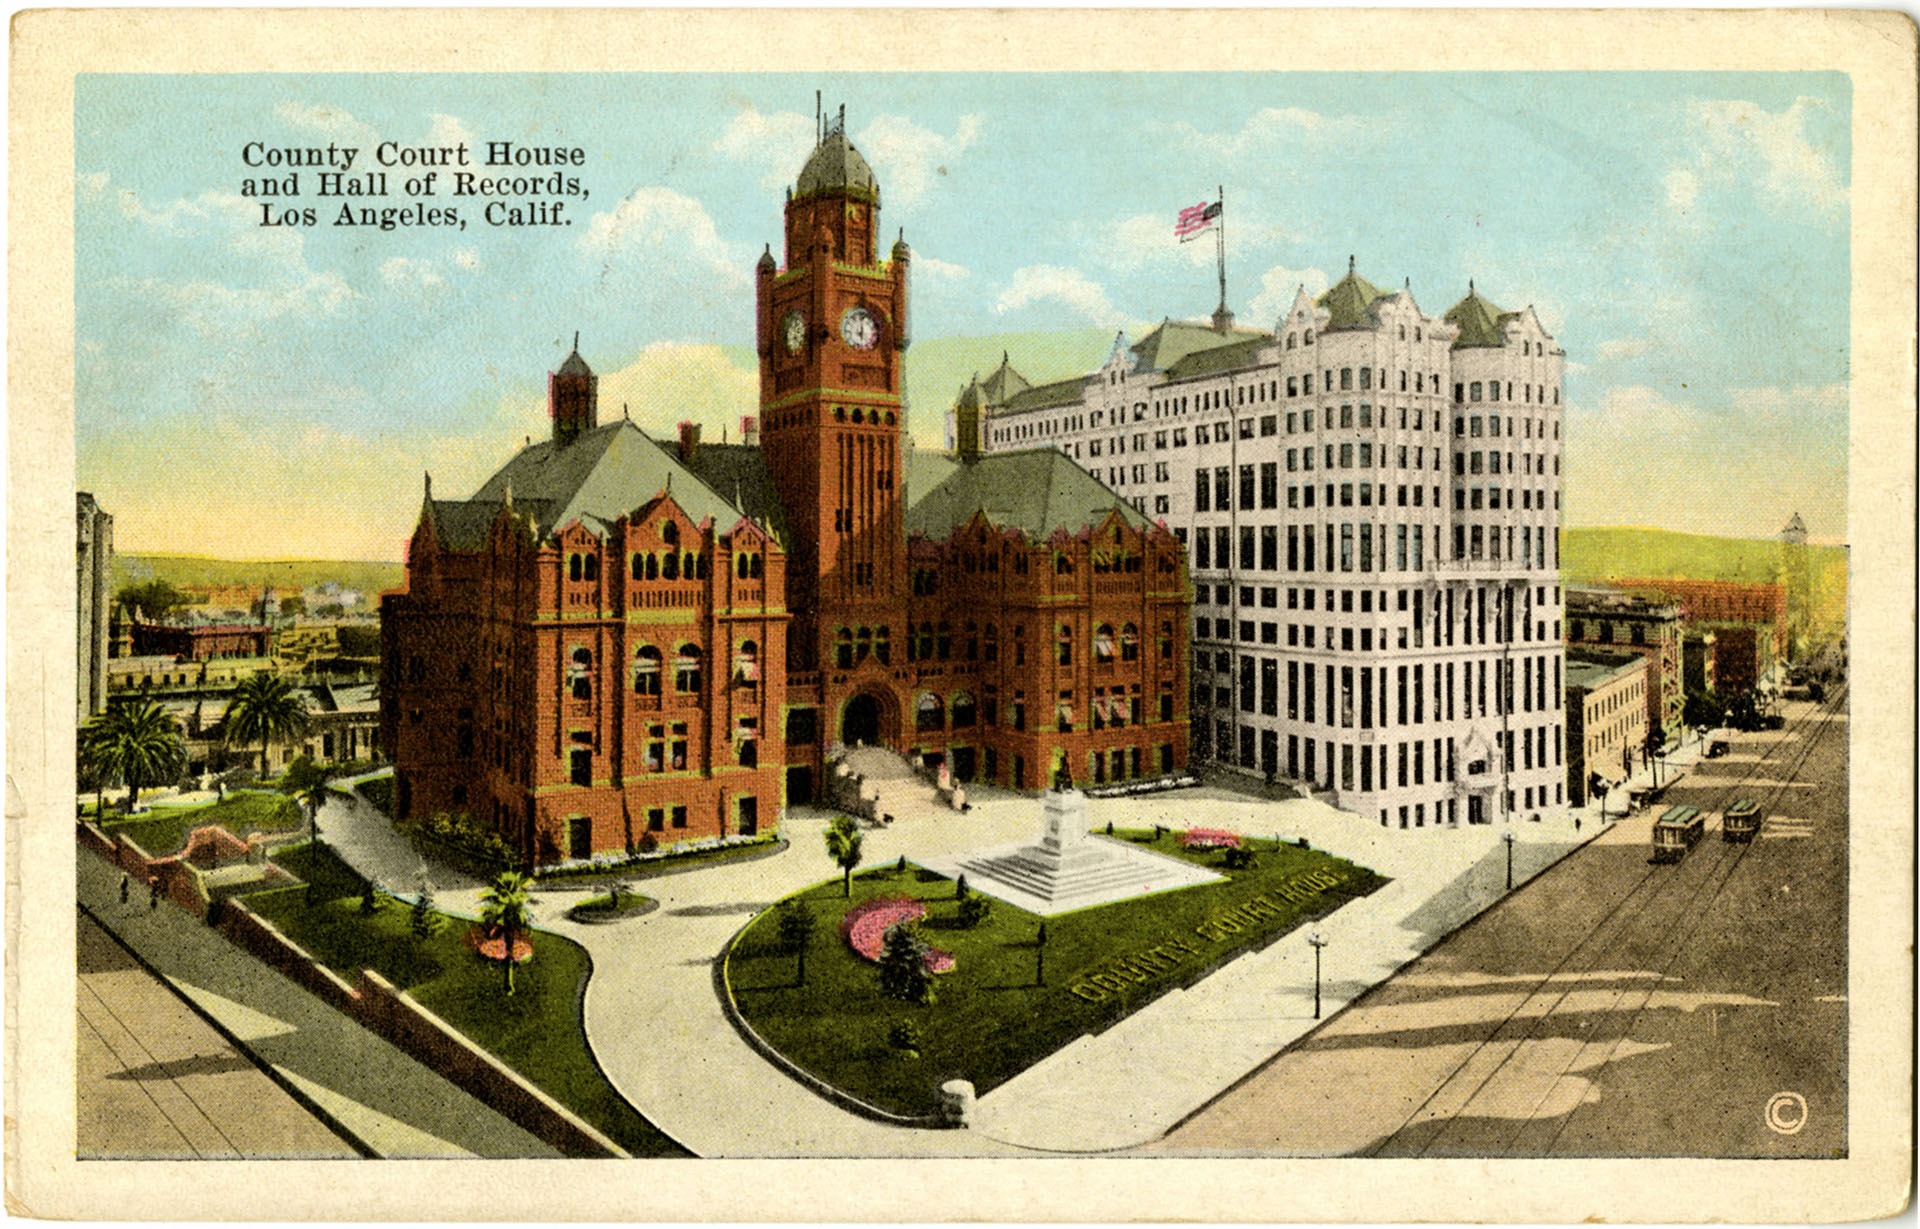 County Courthouse and Hall of Records, Los Angeles, circa 1907